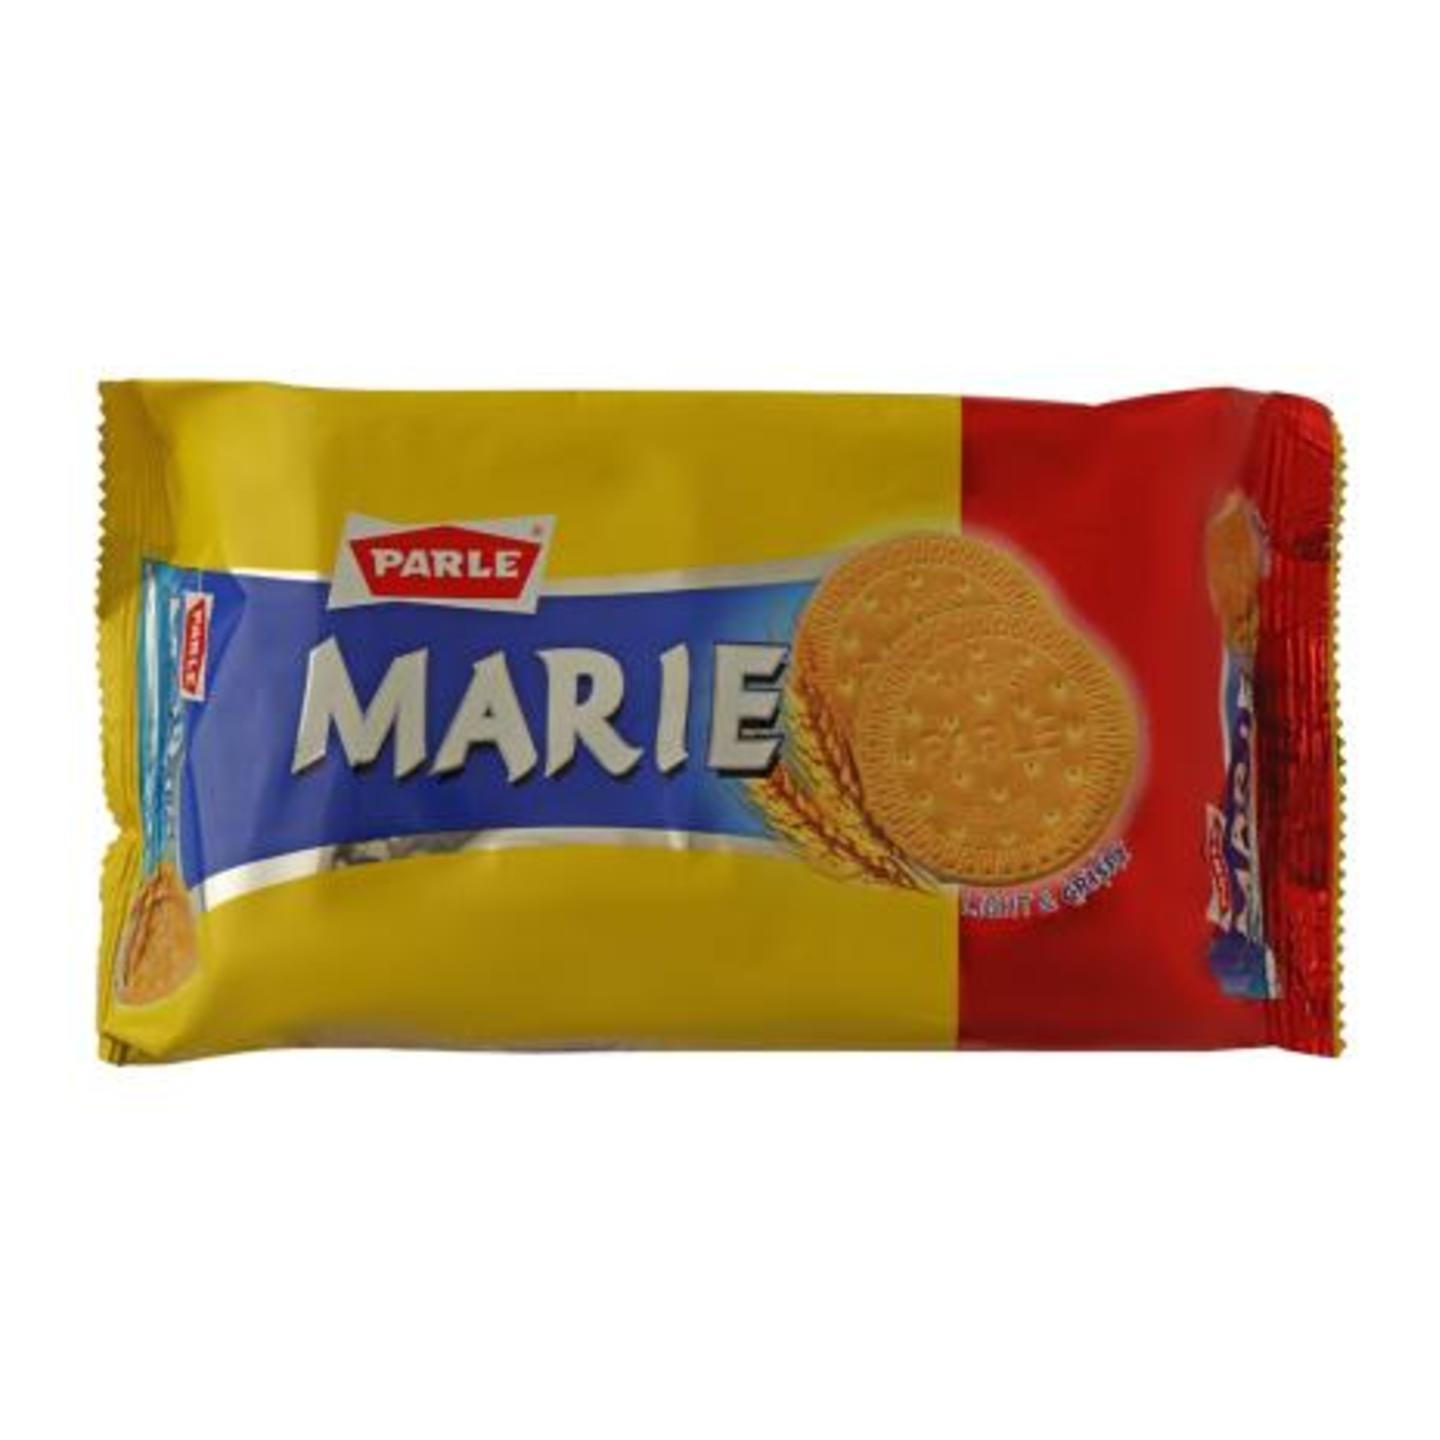 Parle Marie Biscuits 250 g